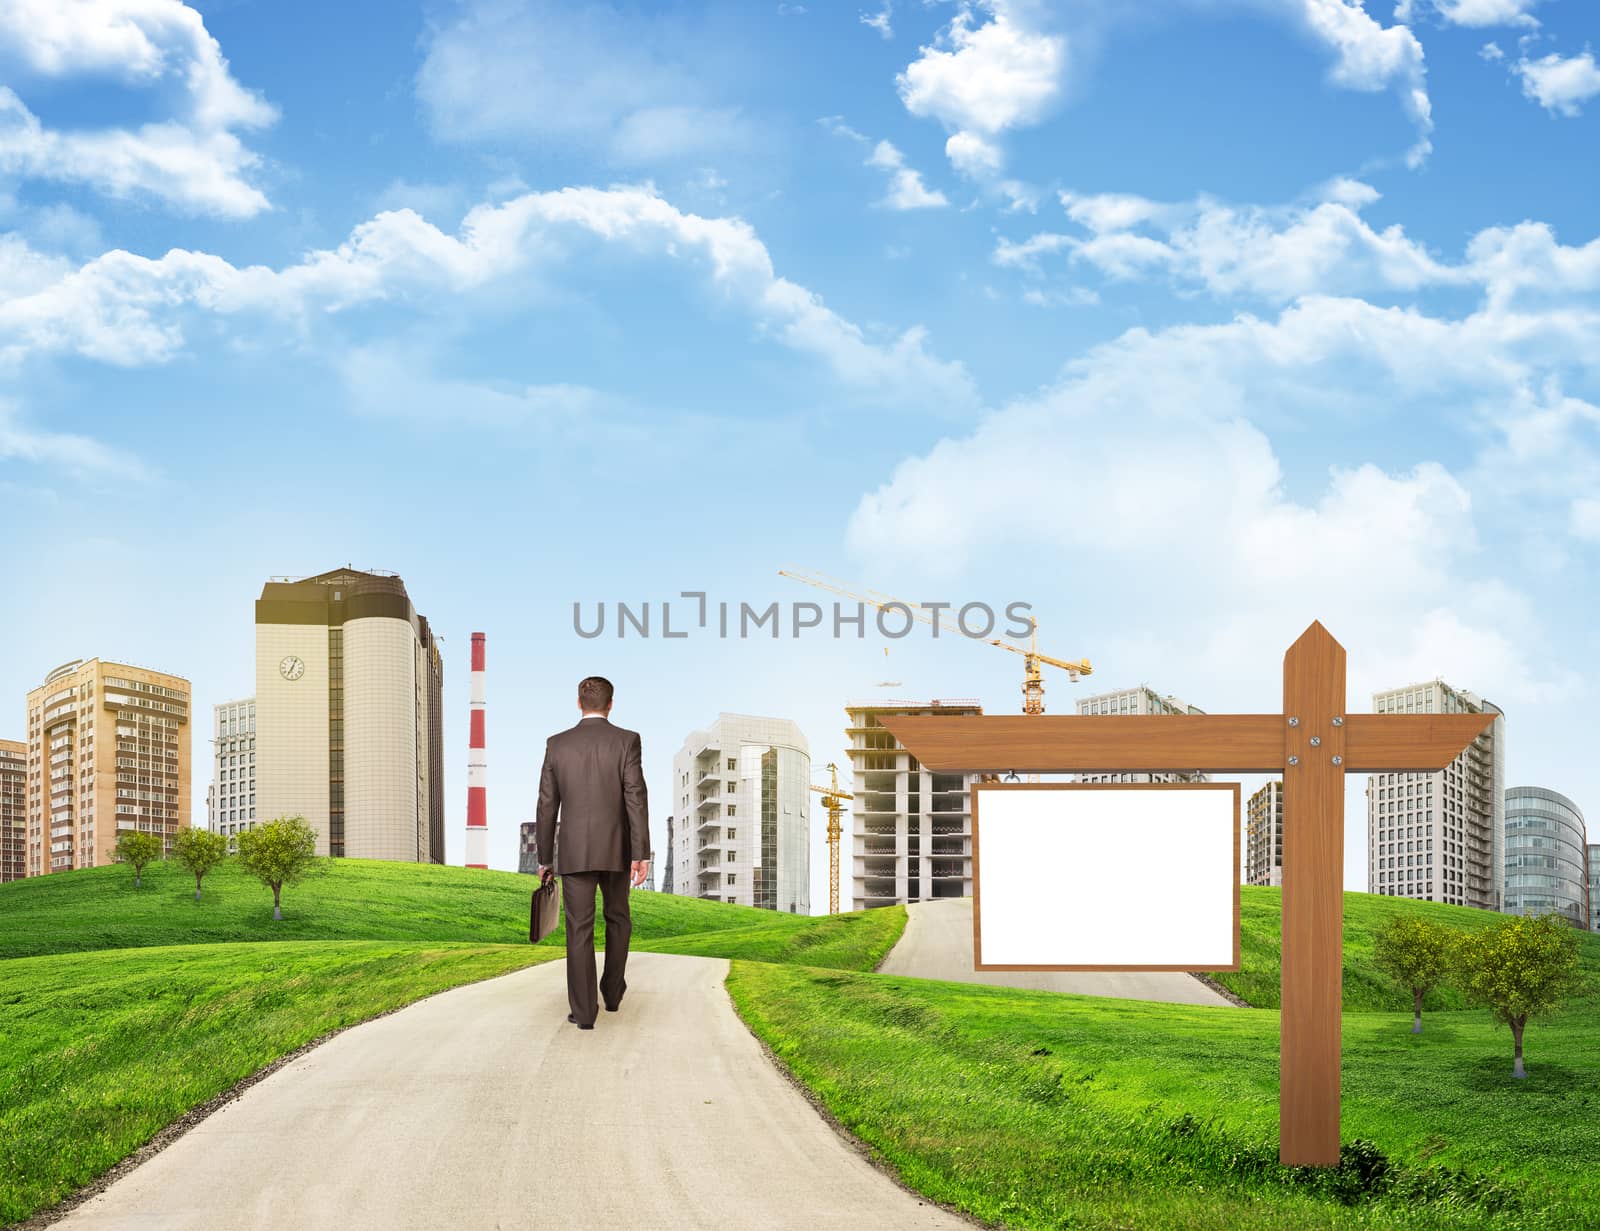 Businessman walks on road. Rear view. Buildings, grass field, wooden signboard and sky in background. Business concept